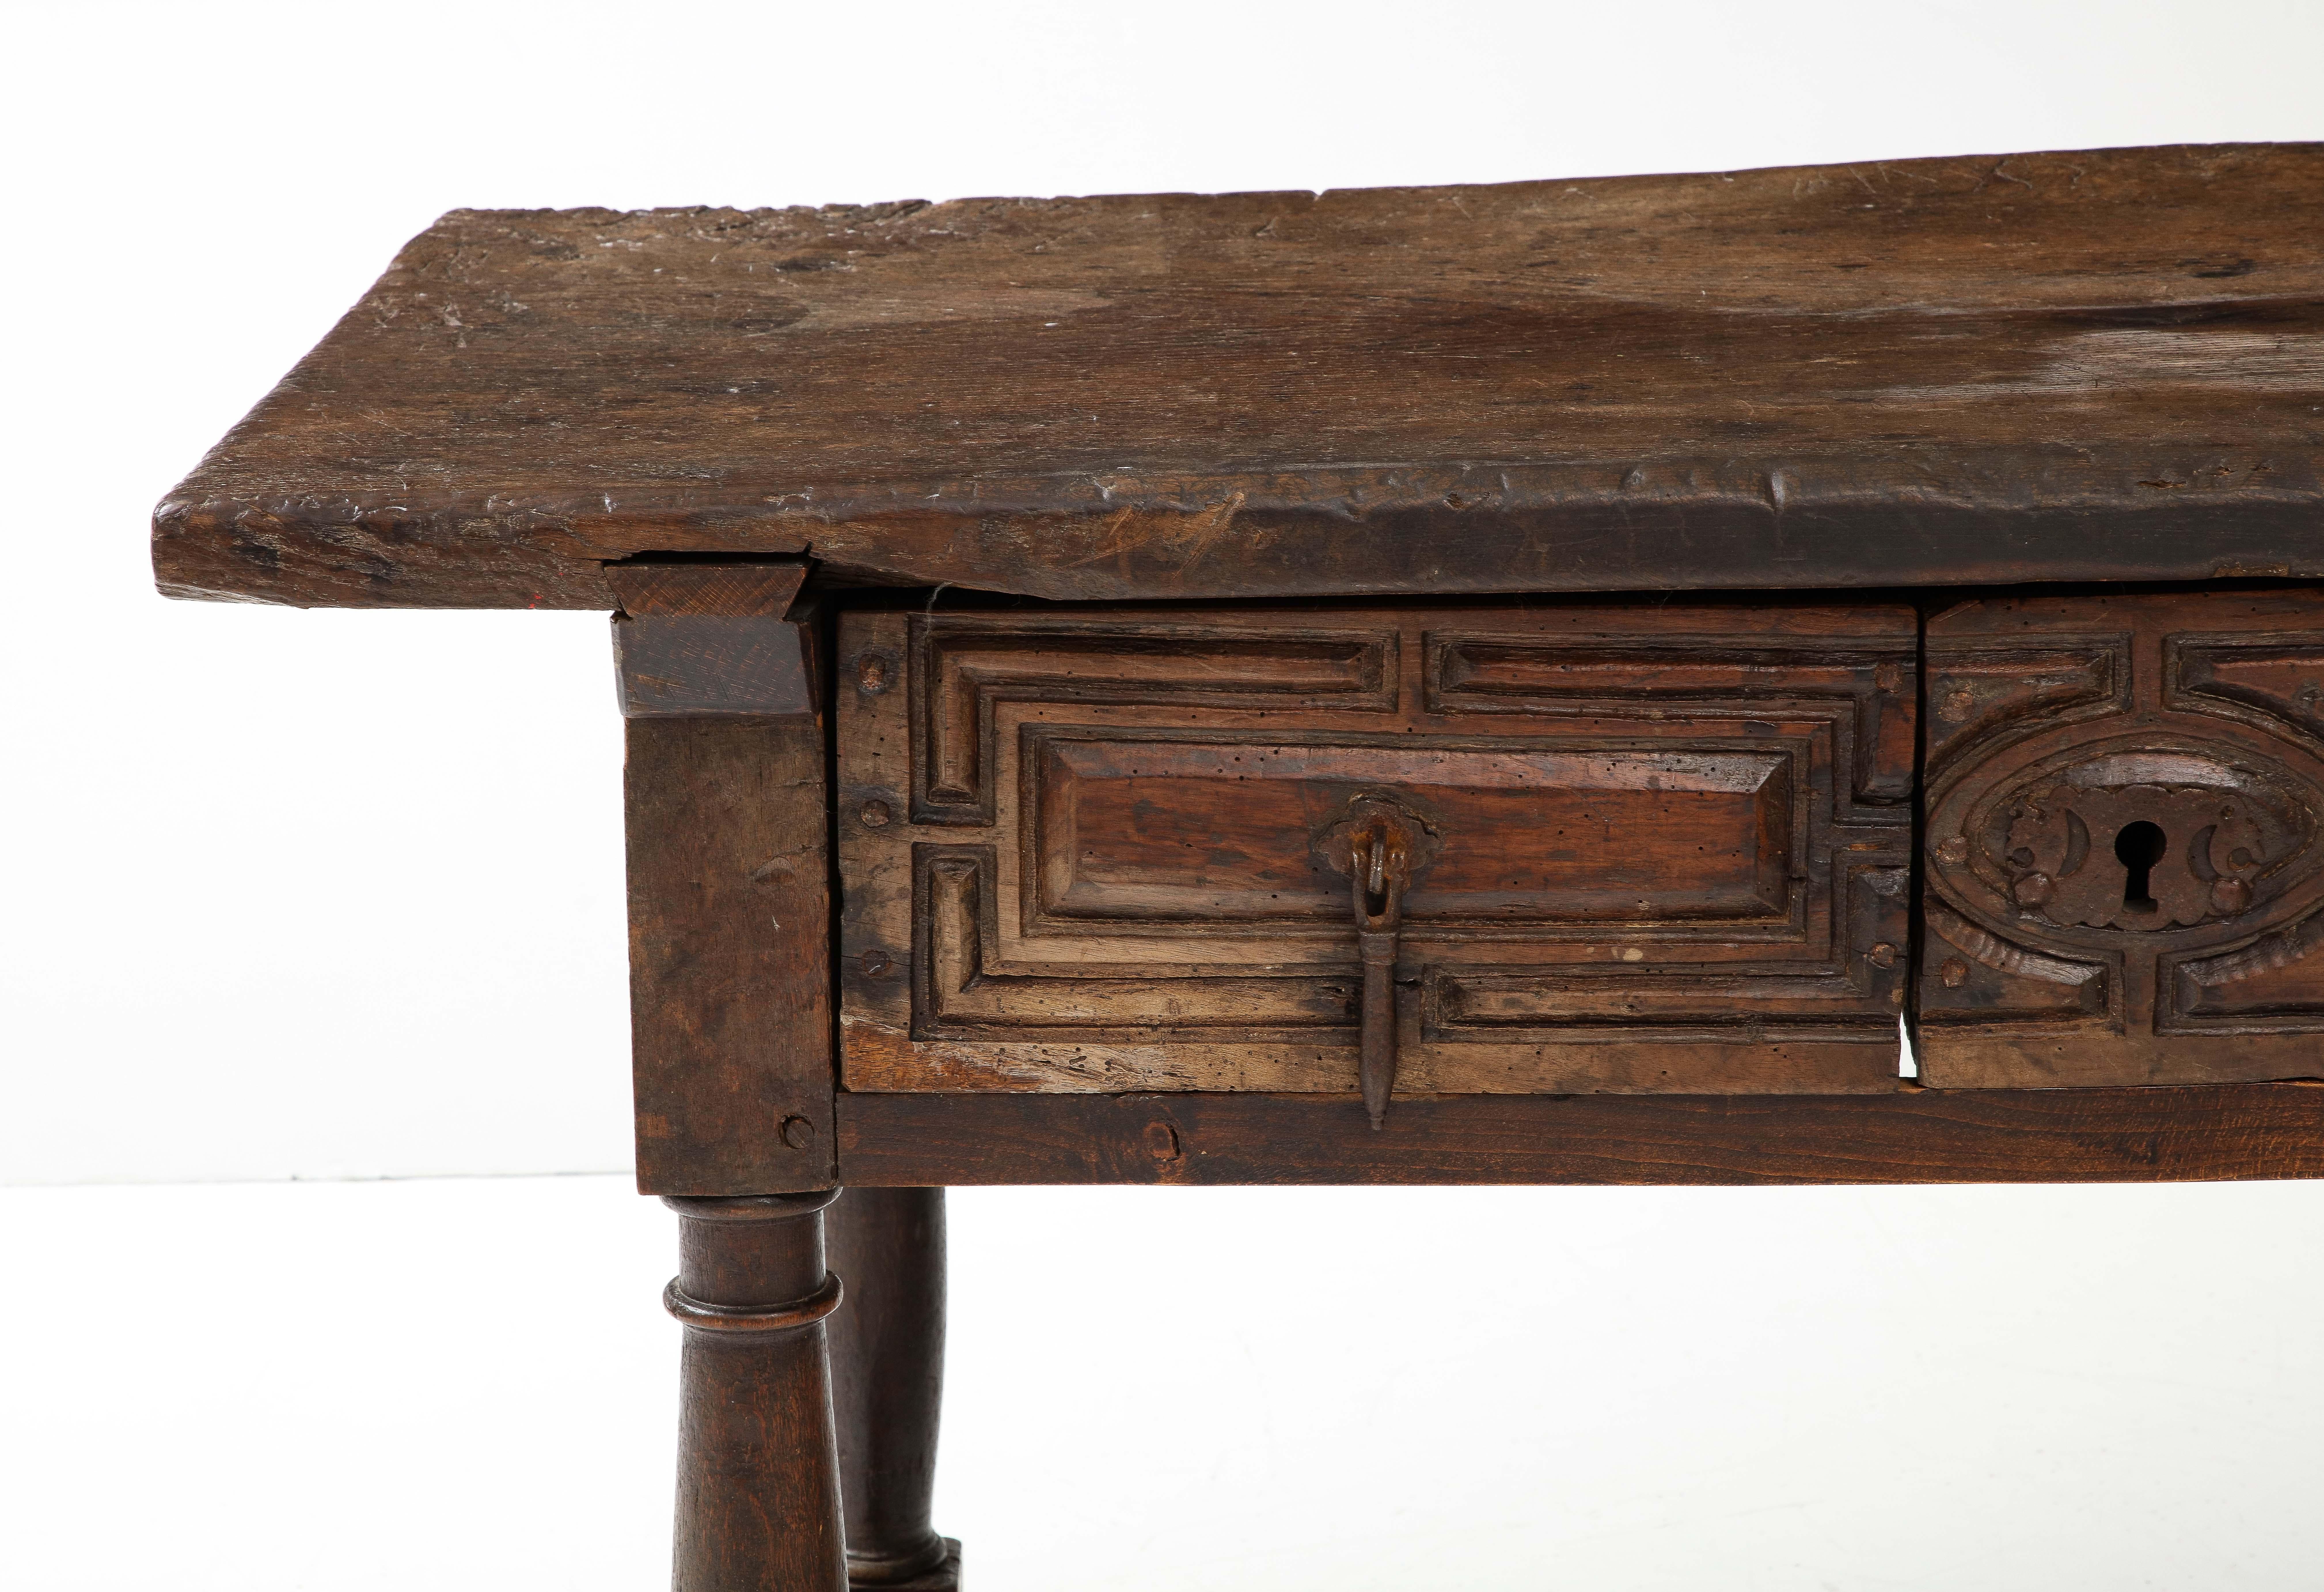 Late 16th C. Spanish Walnut Table with Iron Pulls
Walnut, iron

H: 32 D: 29.5 W: 55.5 in.

Incredible Iron pools & Hand Carved Drawers